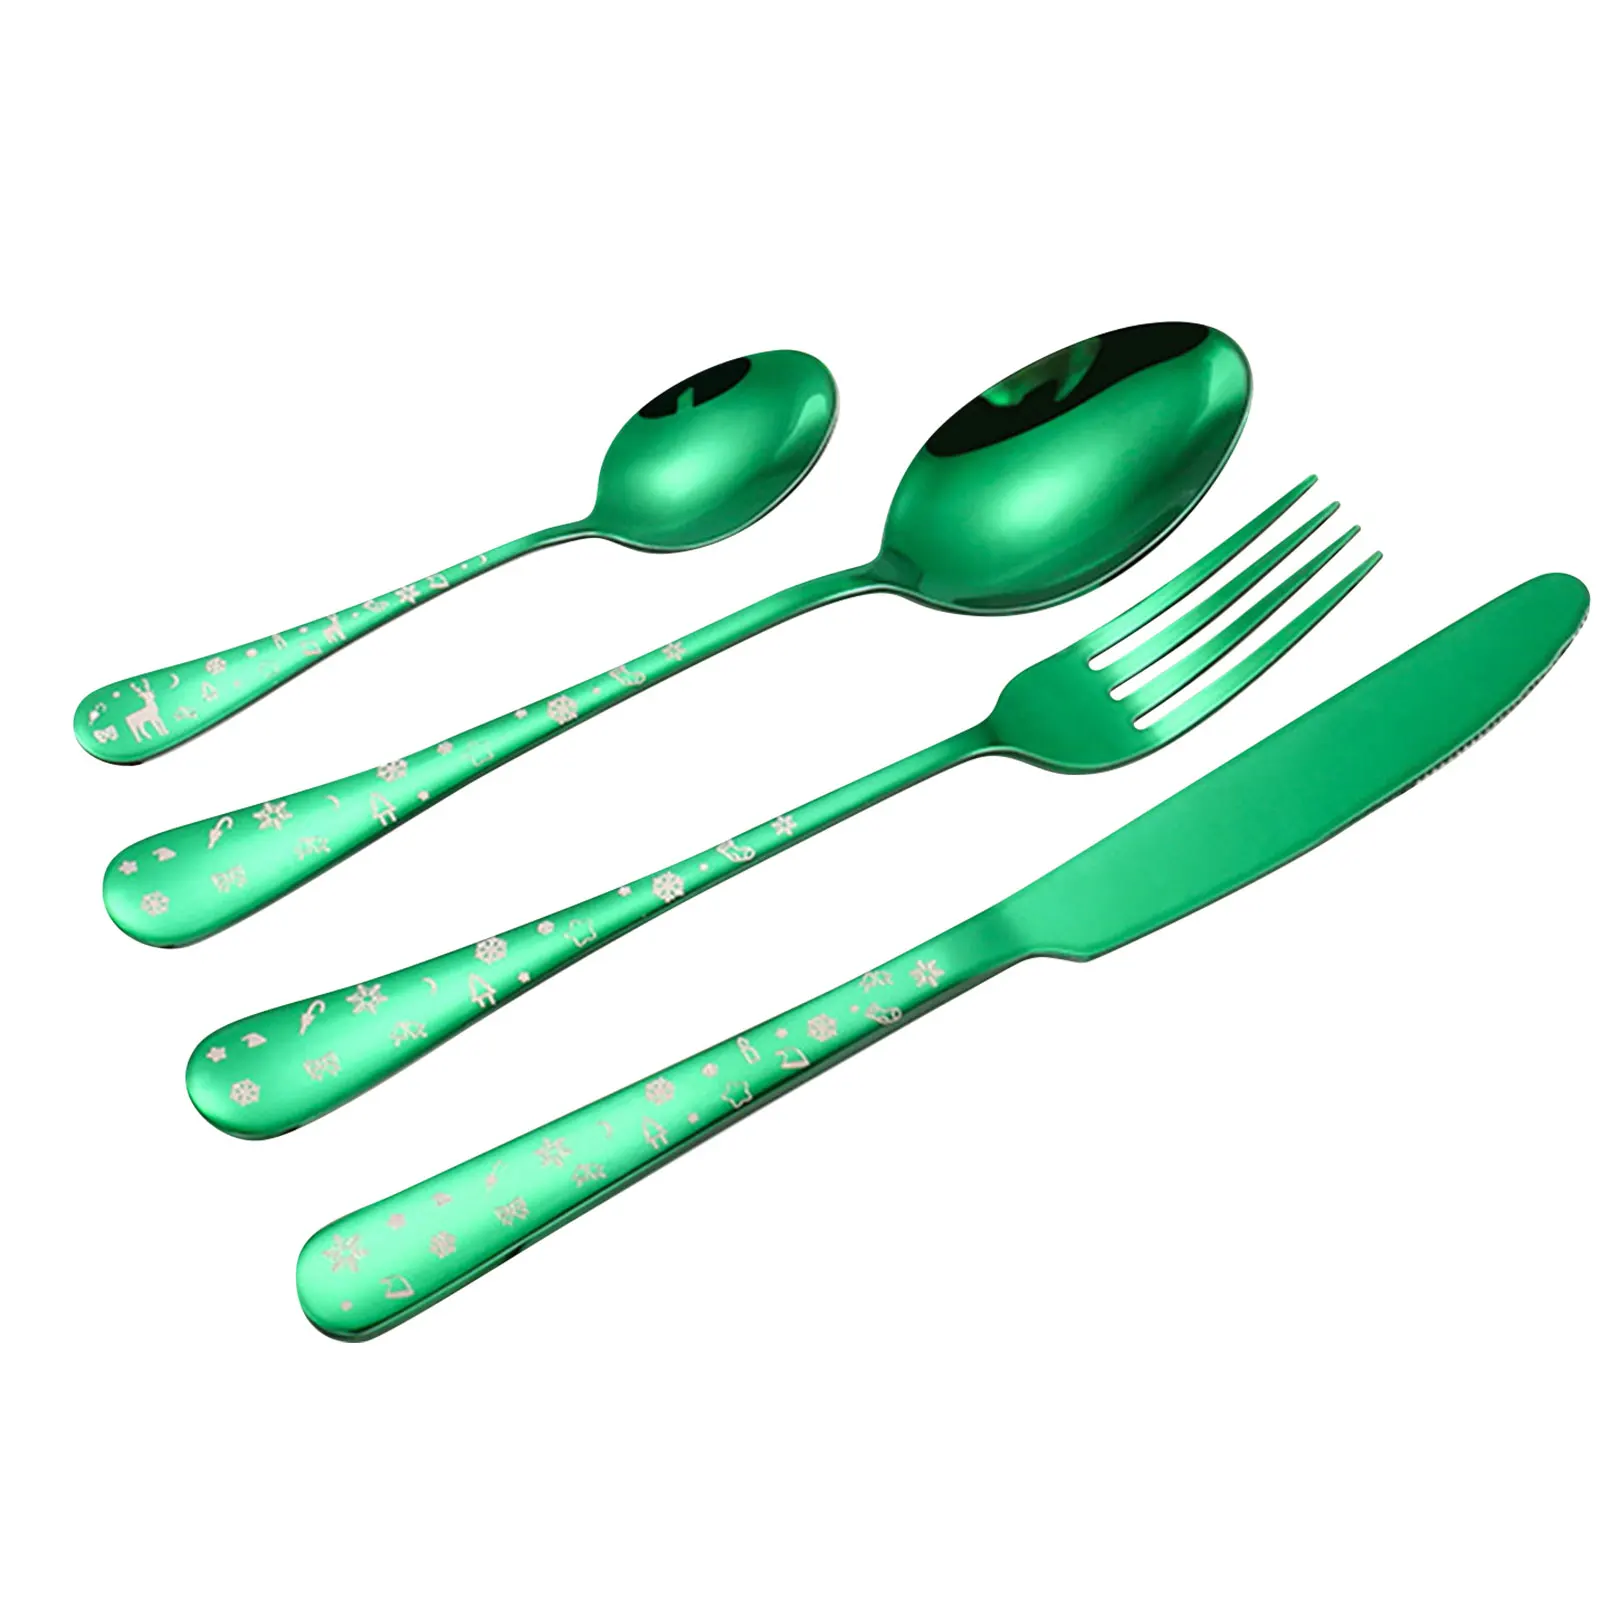 

4pcs/set High Quality Christmas Flatware Set Stainless Steel Red Green Dinnerware Knife Fork Spoon Cutlery Kitchen Food 45a